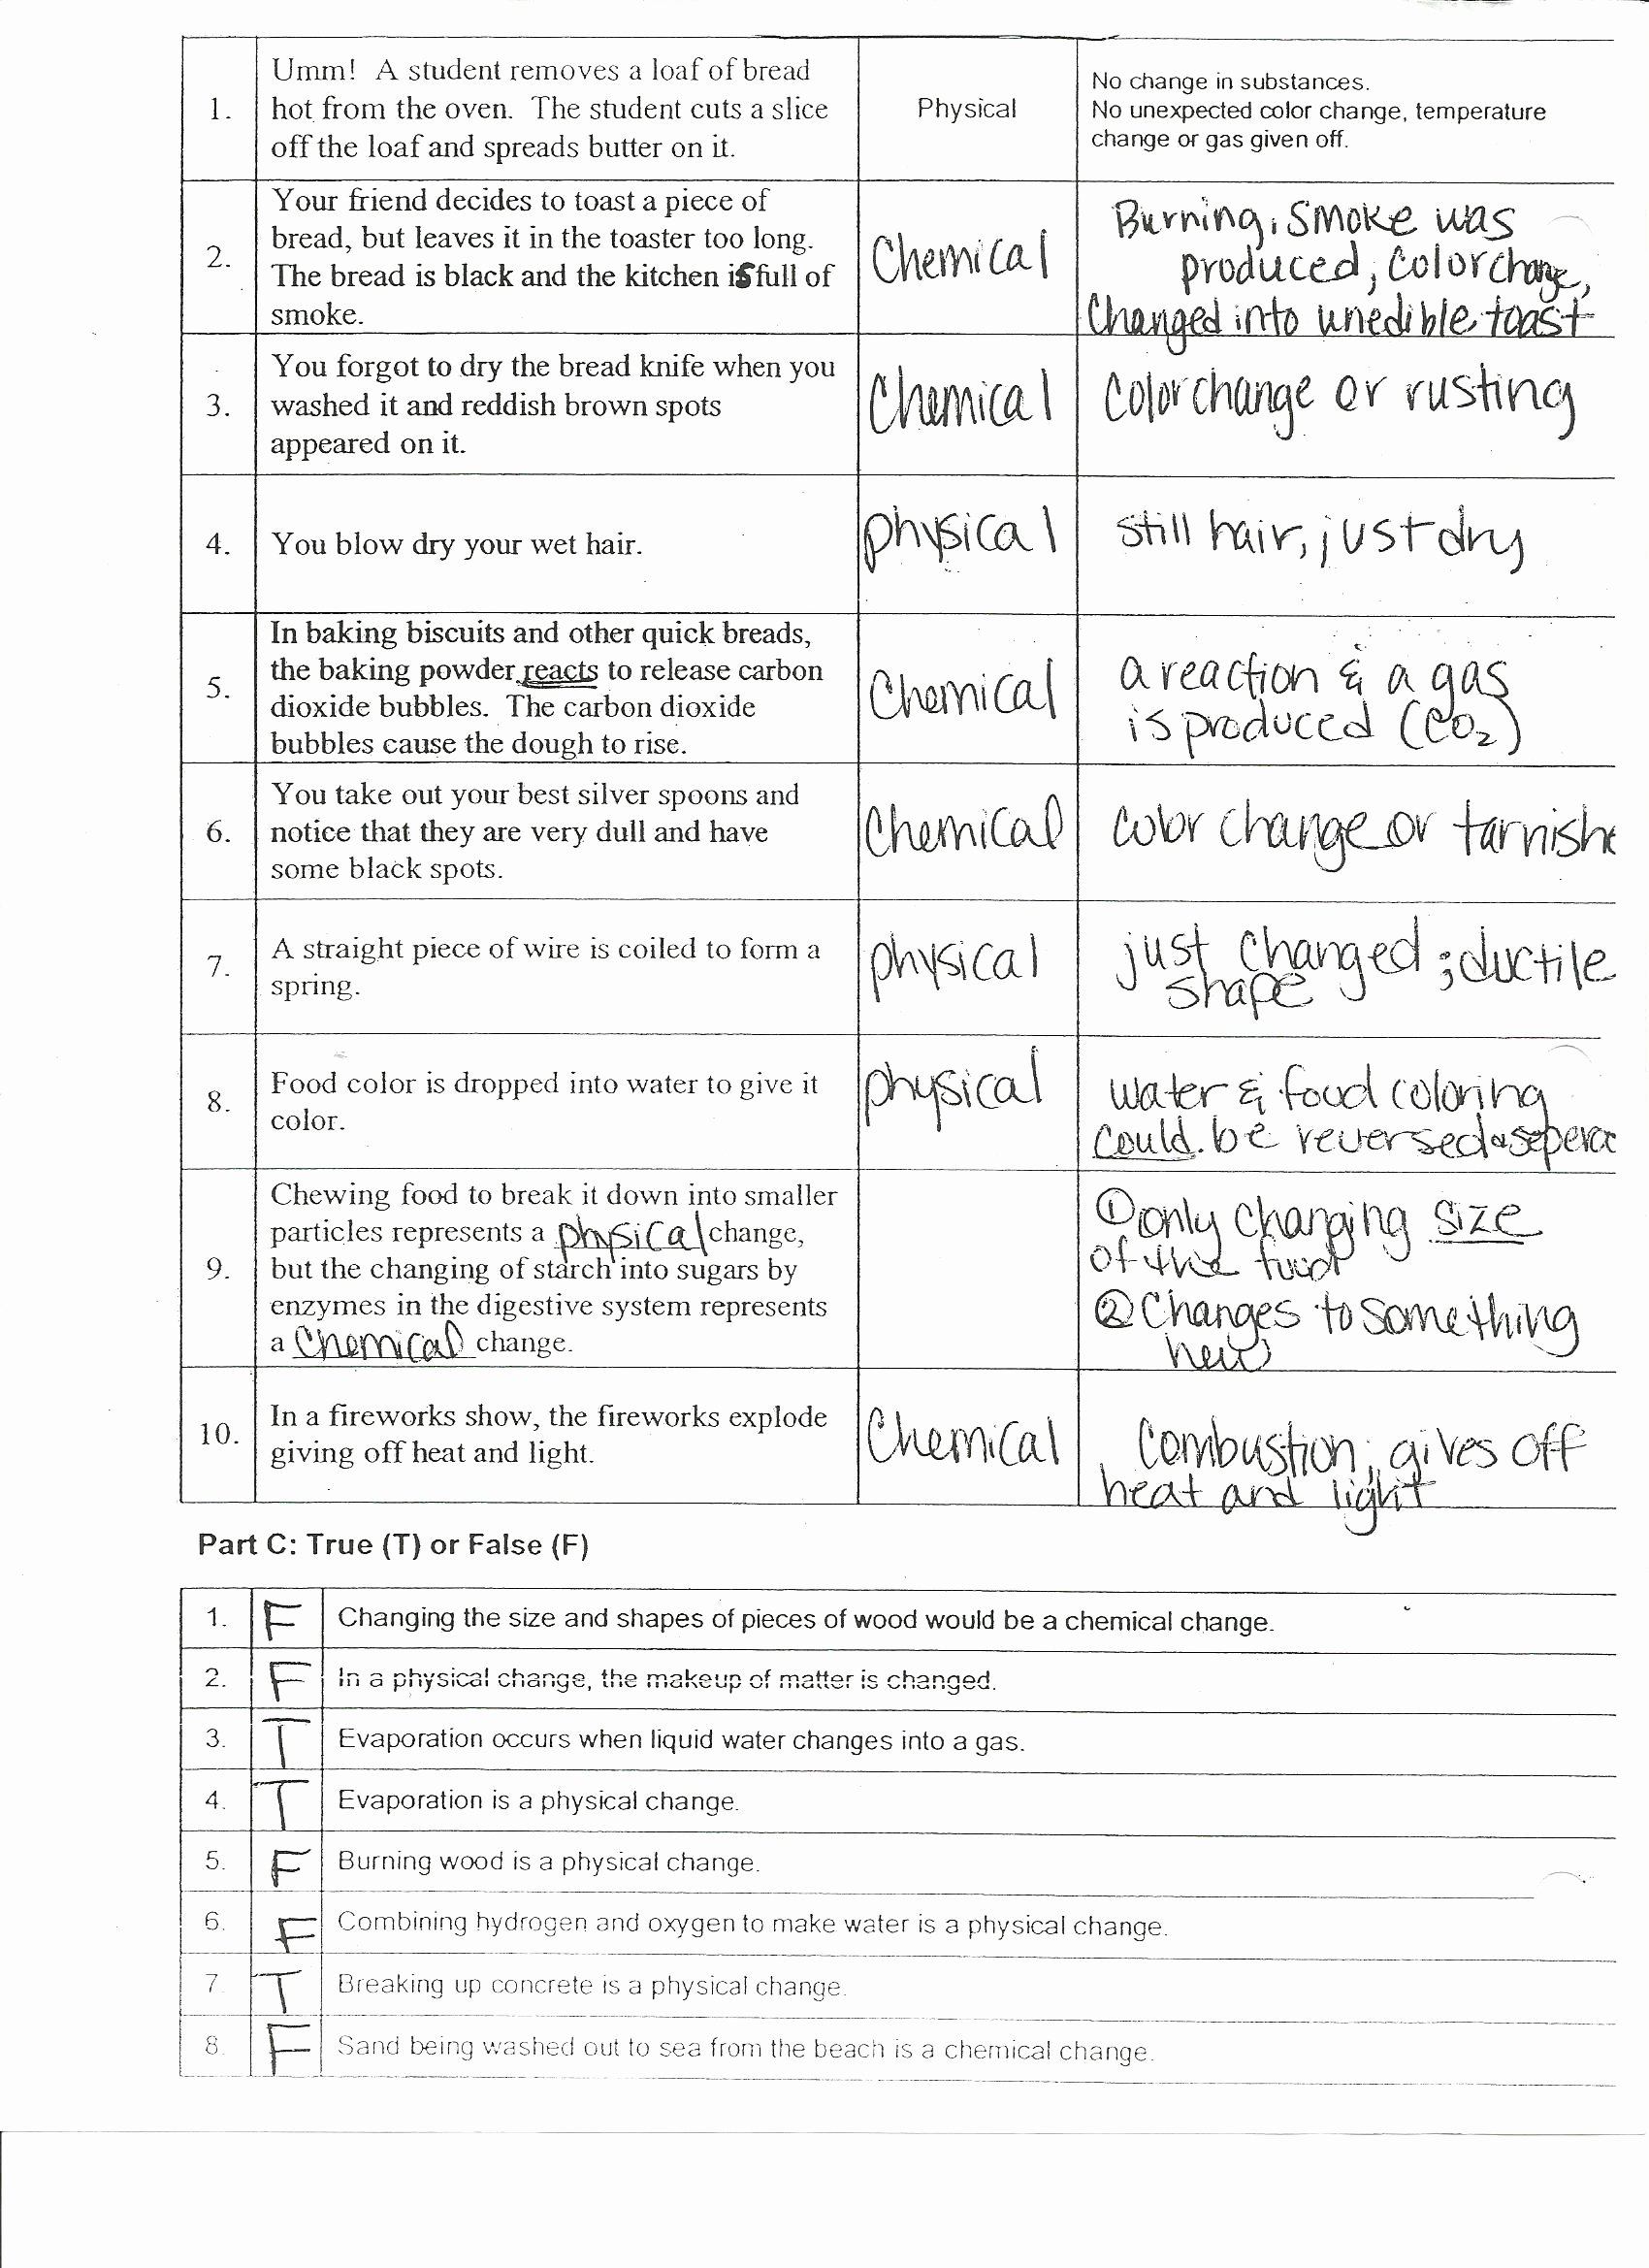 Chemical and Physical Changes Worksheet Unique 35 Chemical and Physical Changes Worksheet Physical and